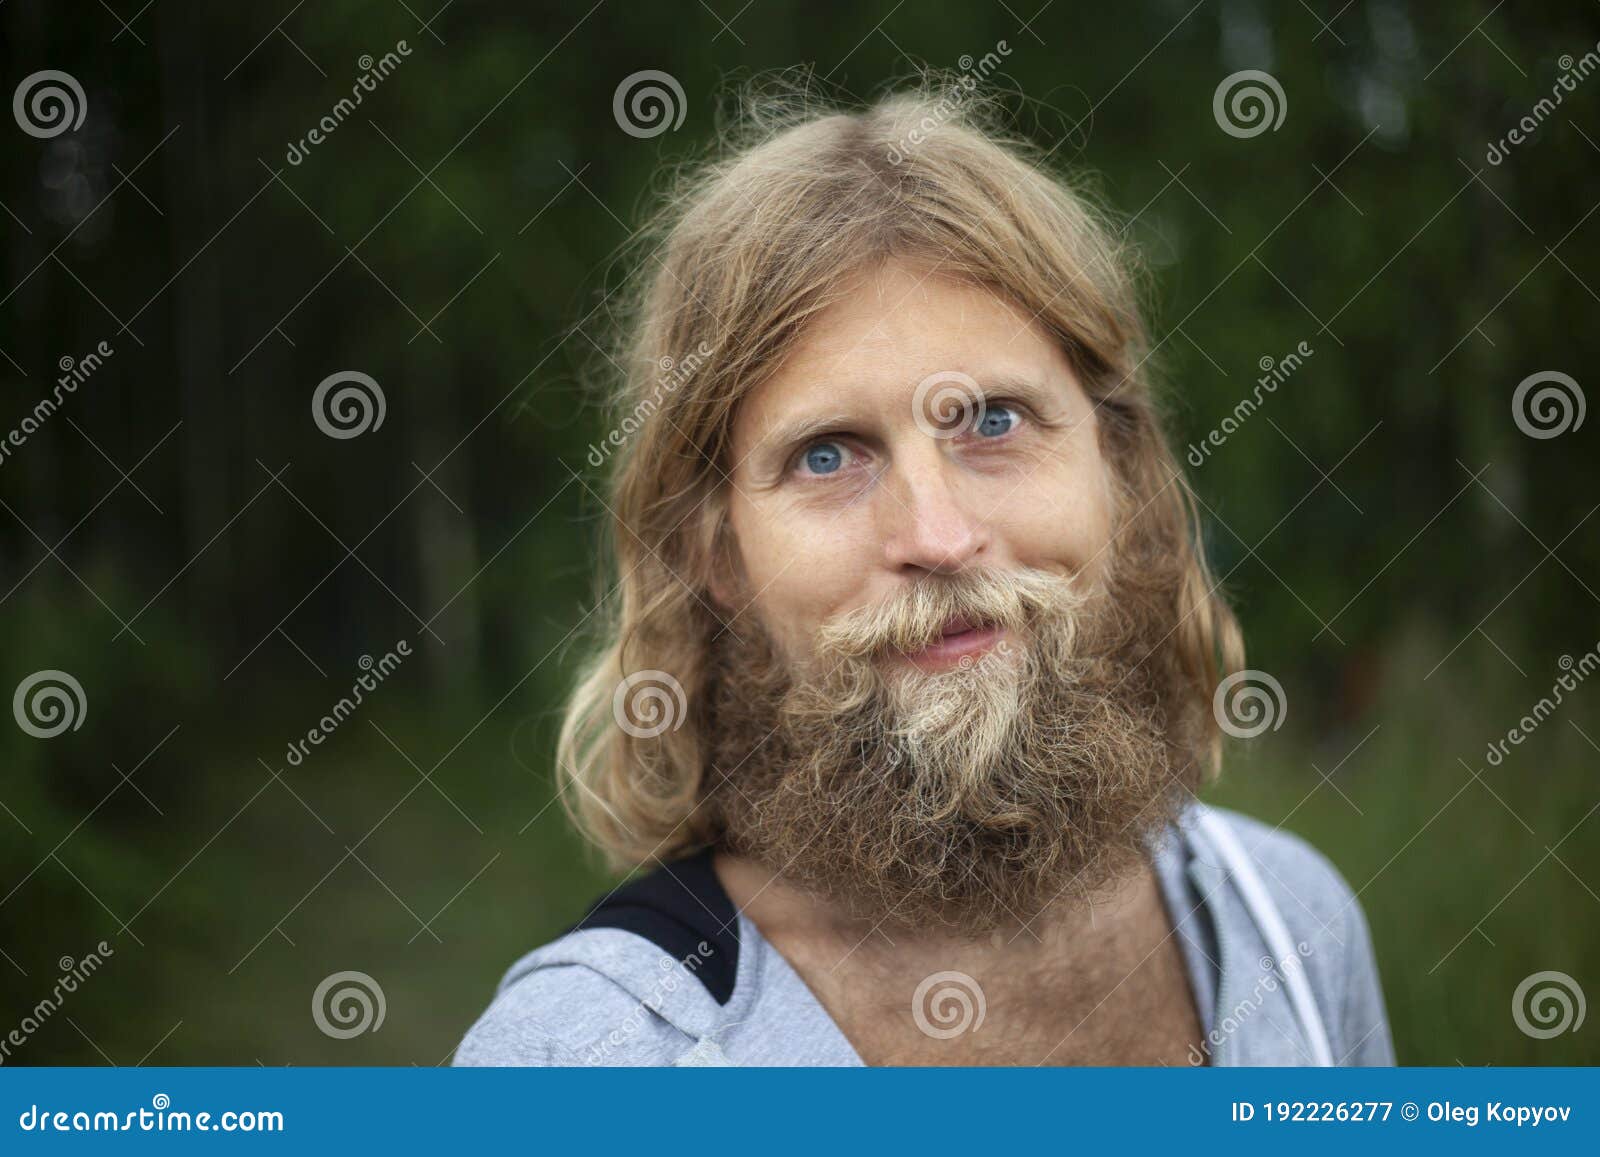 A Guy with a Big White Beard. a Man with Long Hair. a Traveler Seeking  Spiritual Insight Stock Image - Image of insight, blueeyed: 192226277